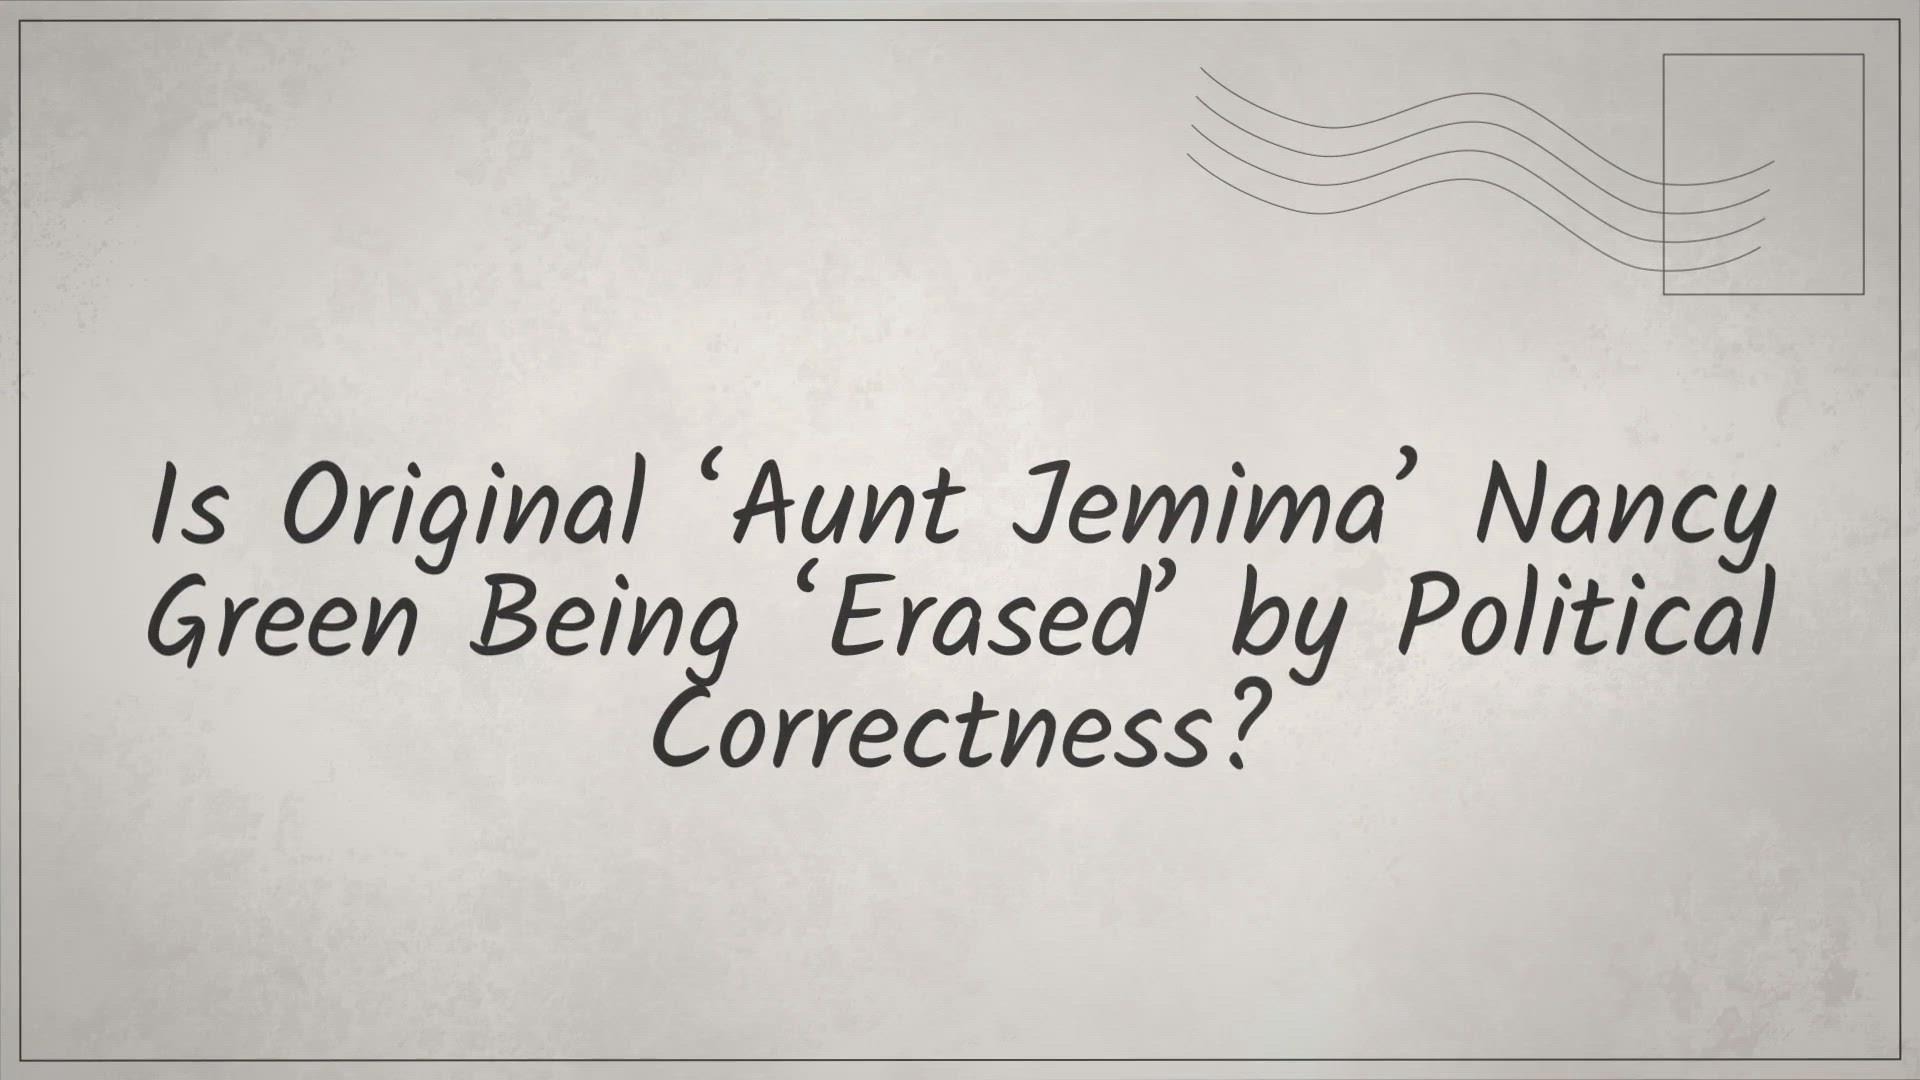 'Video thumbnail for Is Original ‘Aunt Jemima’ Nancy Green Being ‘Erased’ by Political Correctness?'